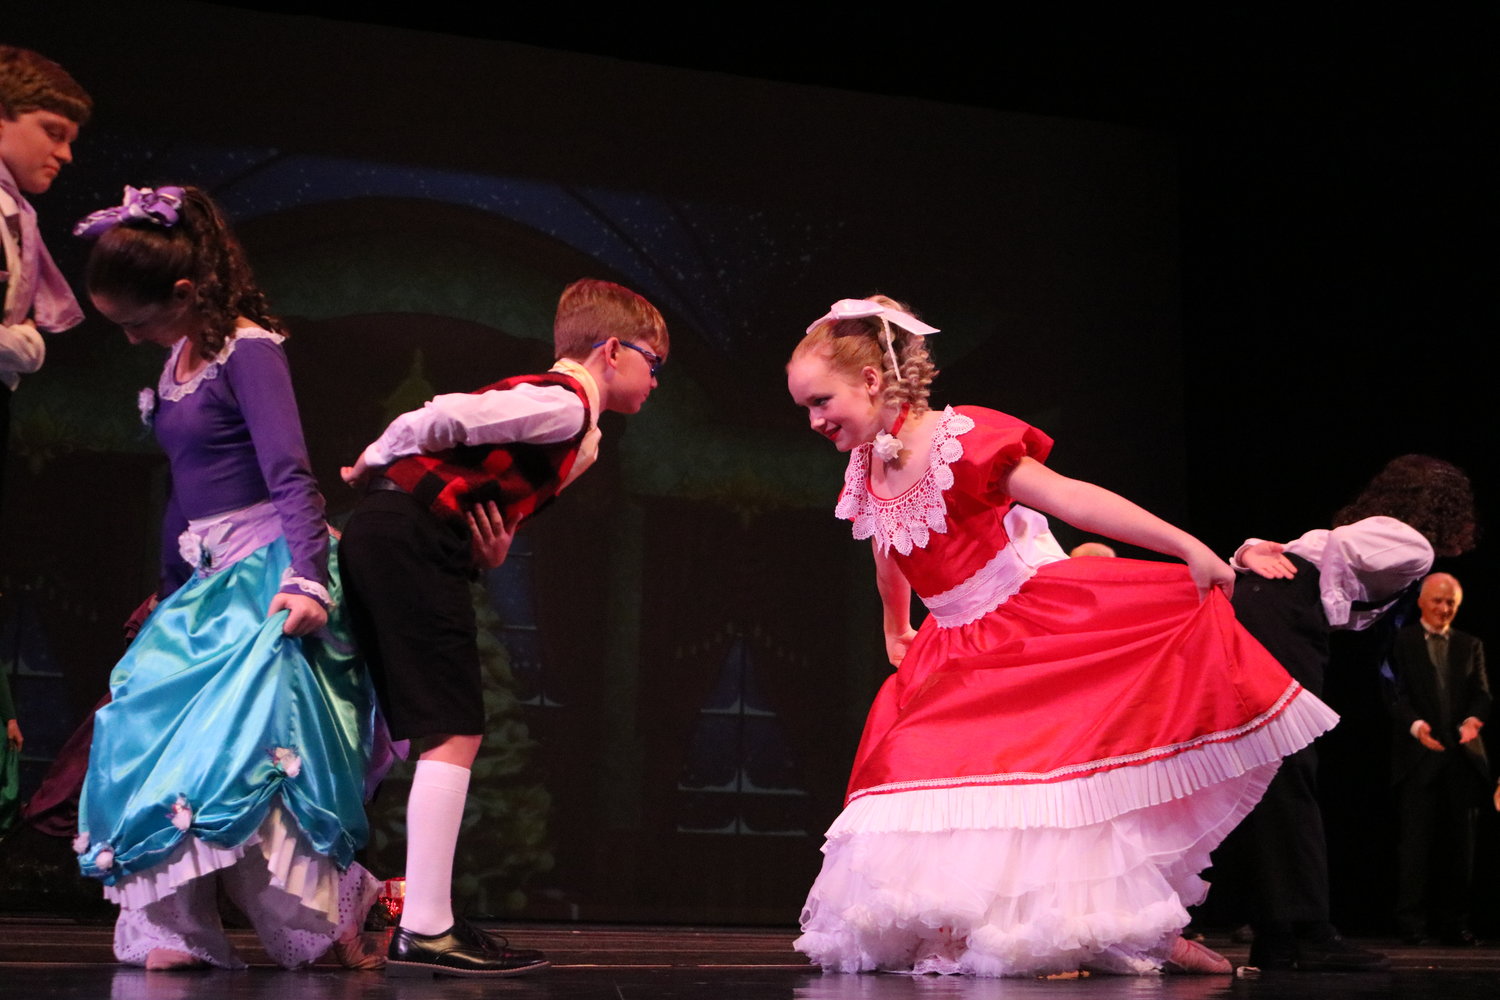 Hundreds will take part in this year’s Christ Church Nutcracker Ballet, including ages from 3 to 84 years old.